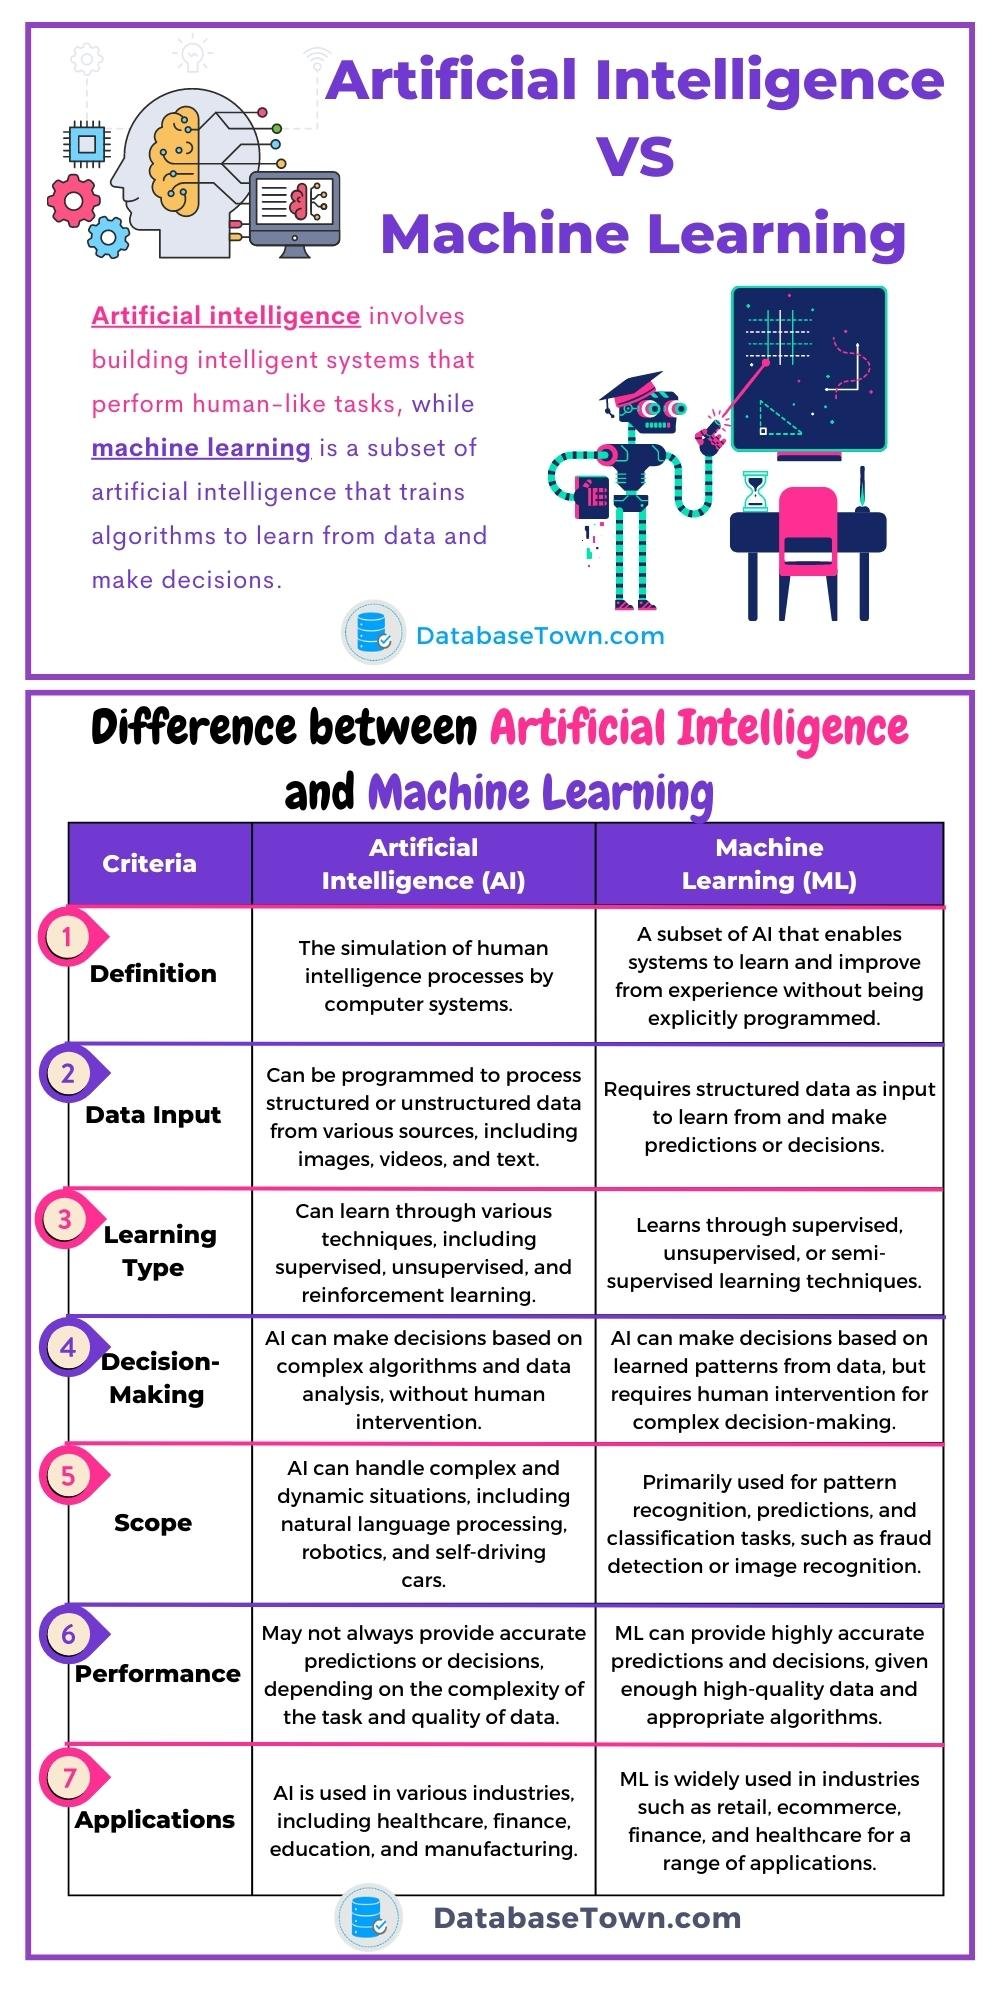 Artificial Intelligence VS Machine Learning